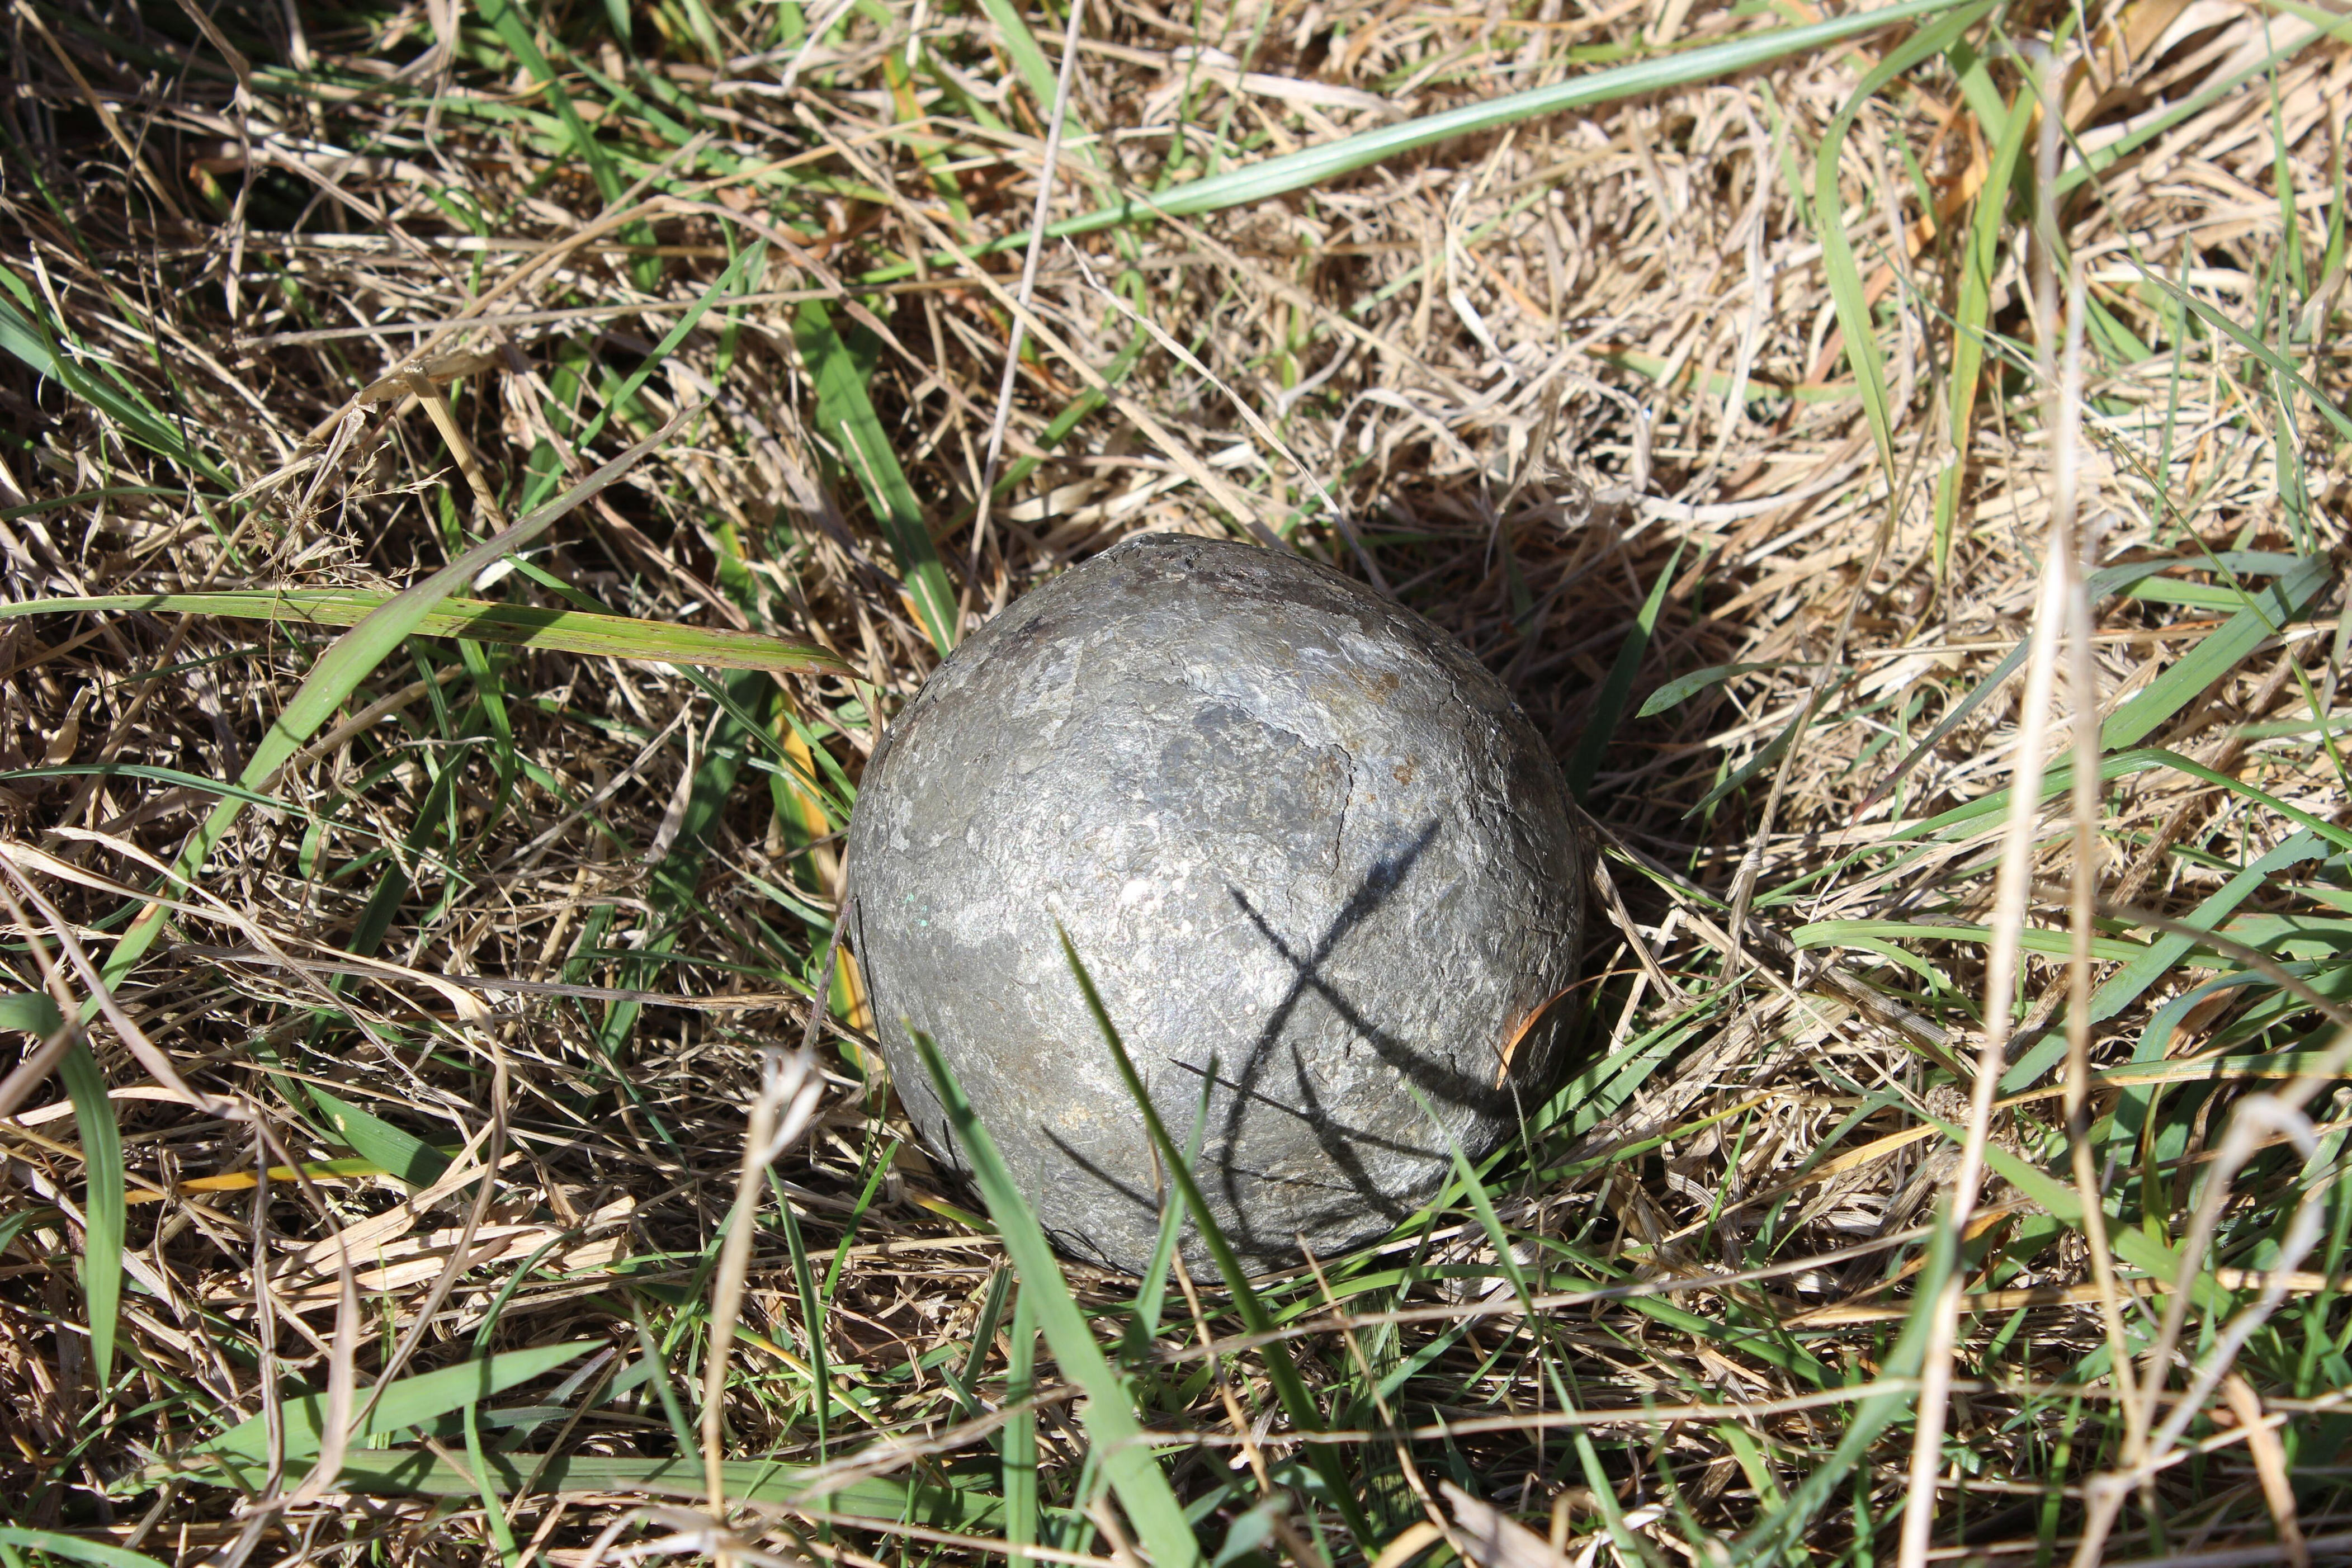 cannonball discovery a ‘riddle inside a mystery’